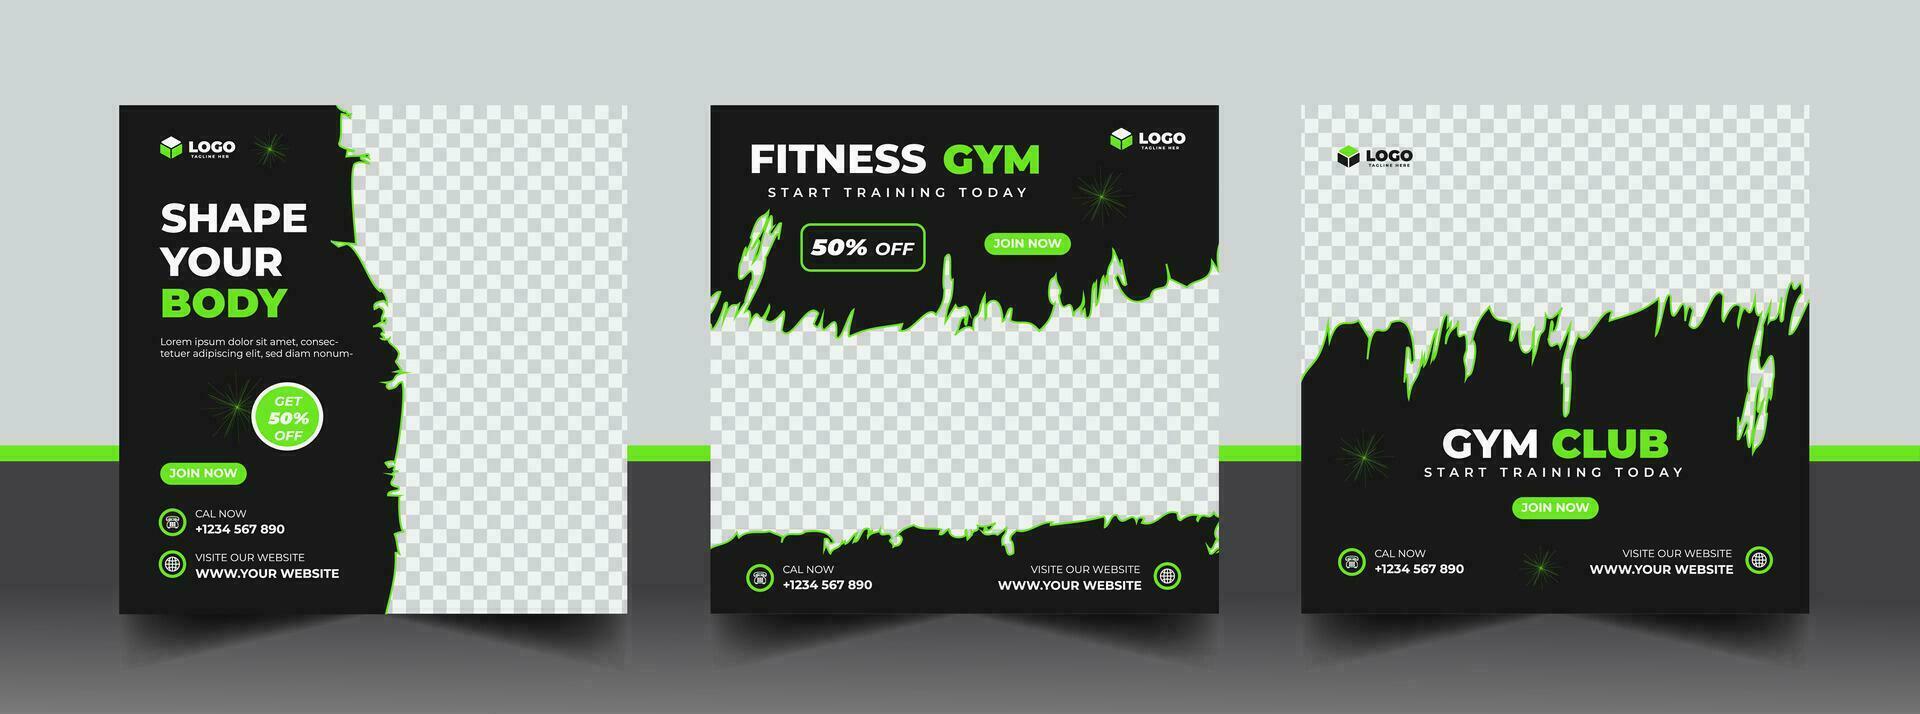 Gym, fitness, and sports social media post template design set. Usable for social media, banner, and website. vector